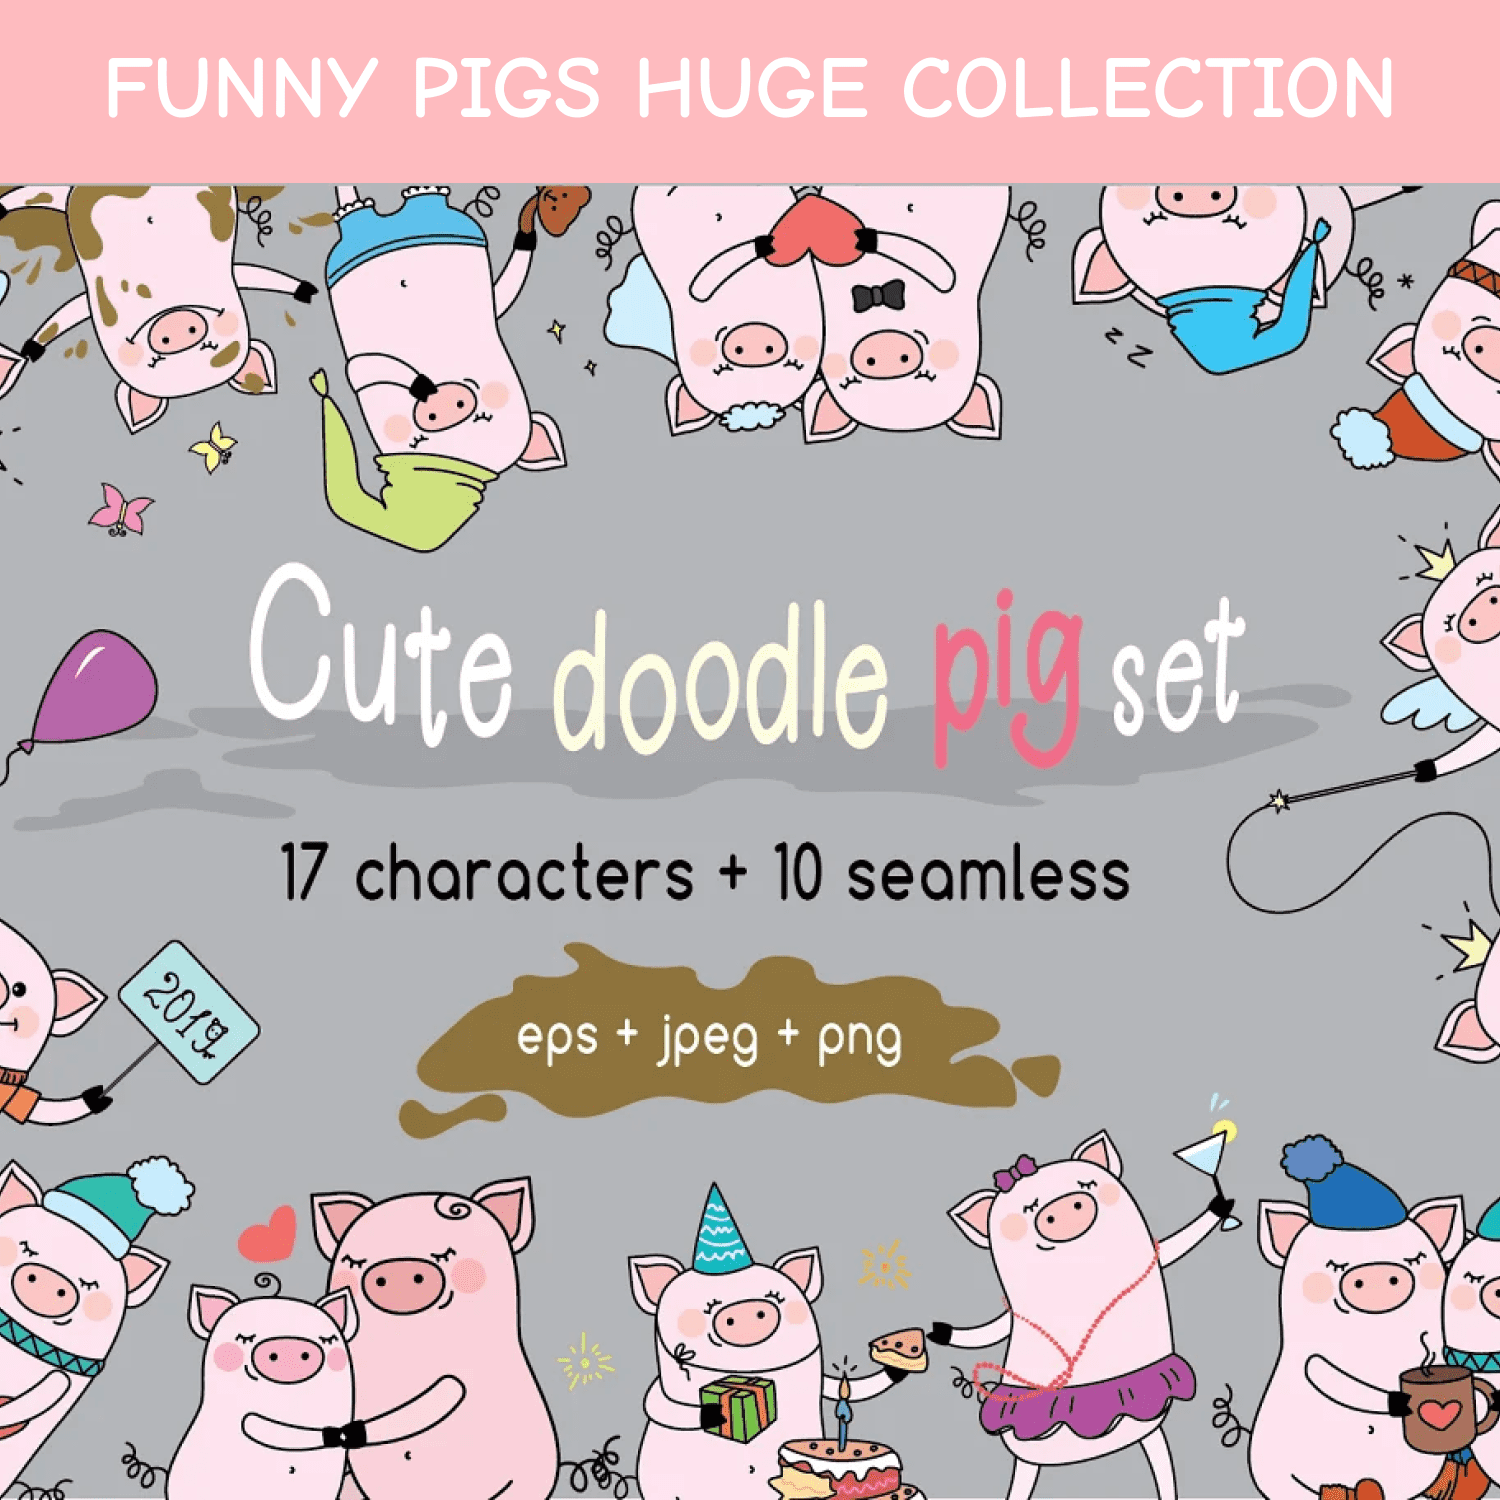 Funny pigs huge collection.